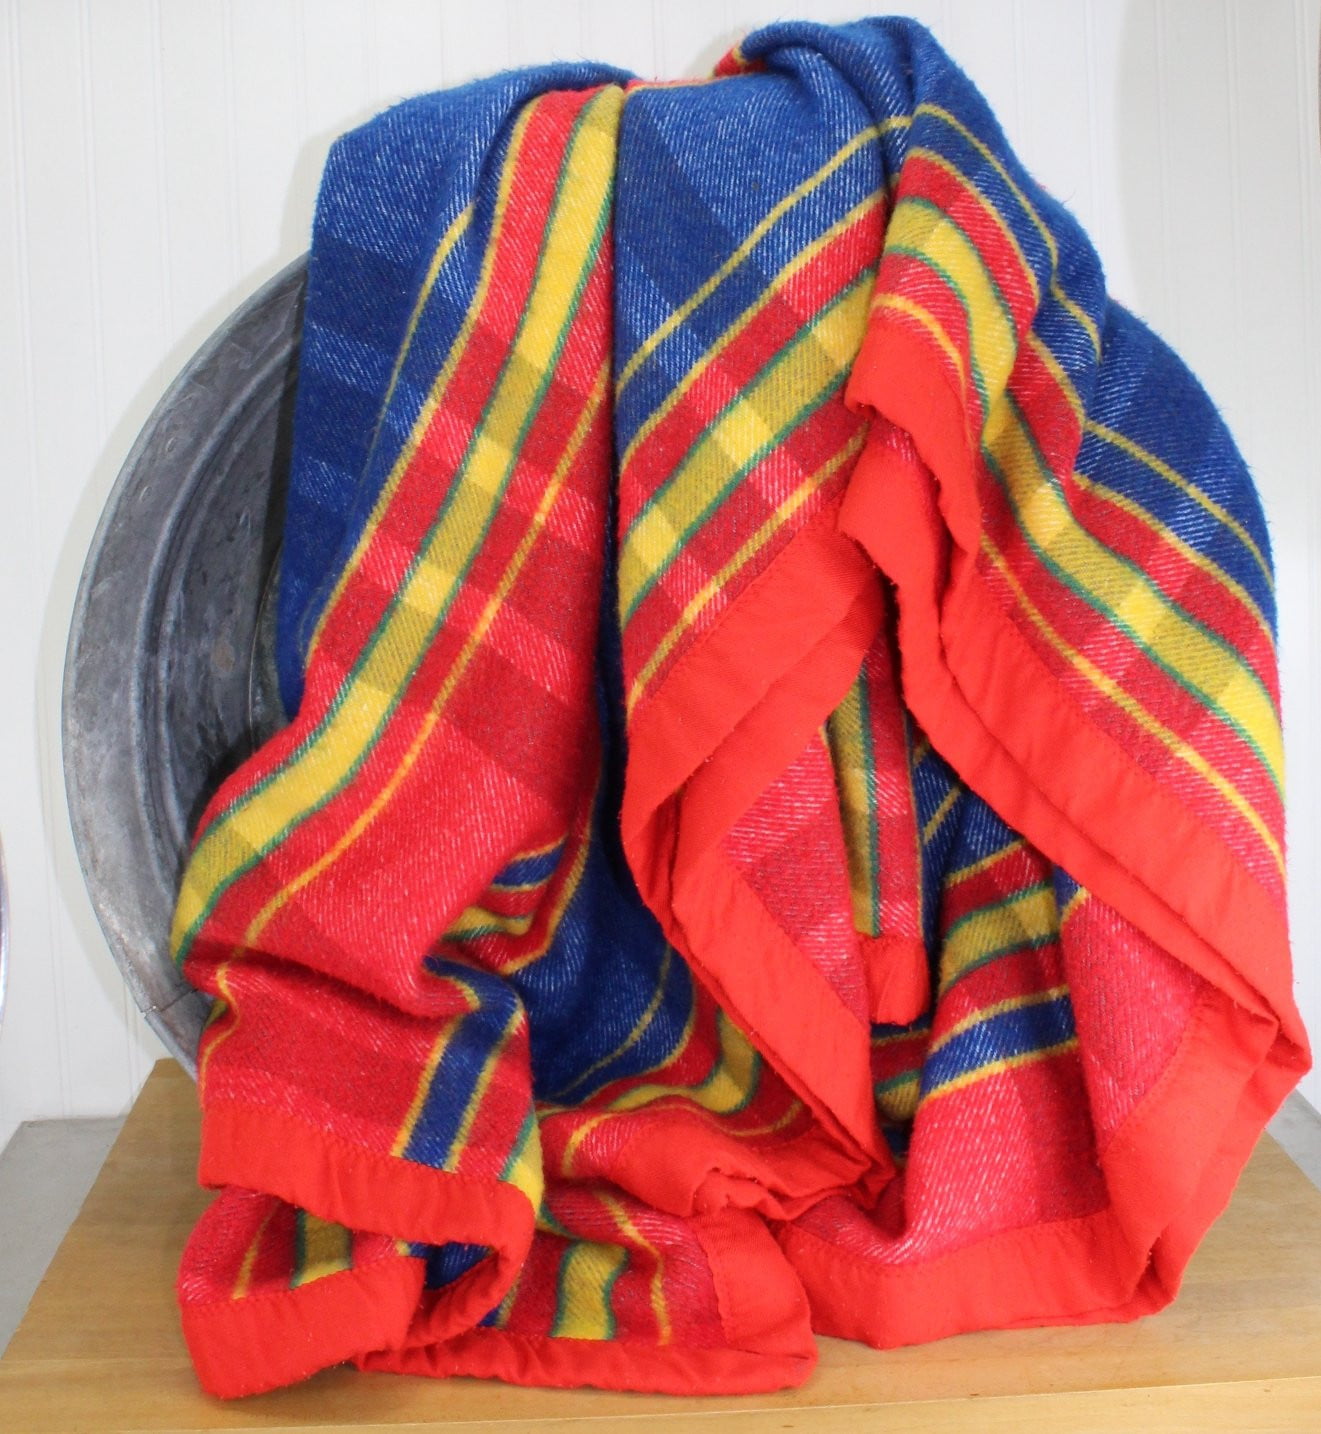 Unbranded Acrylic Blanket France - Primary Bright Colors Heavy Weight - 91" X 80" soft but warm good all season